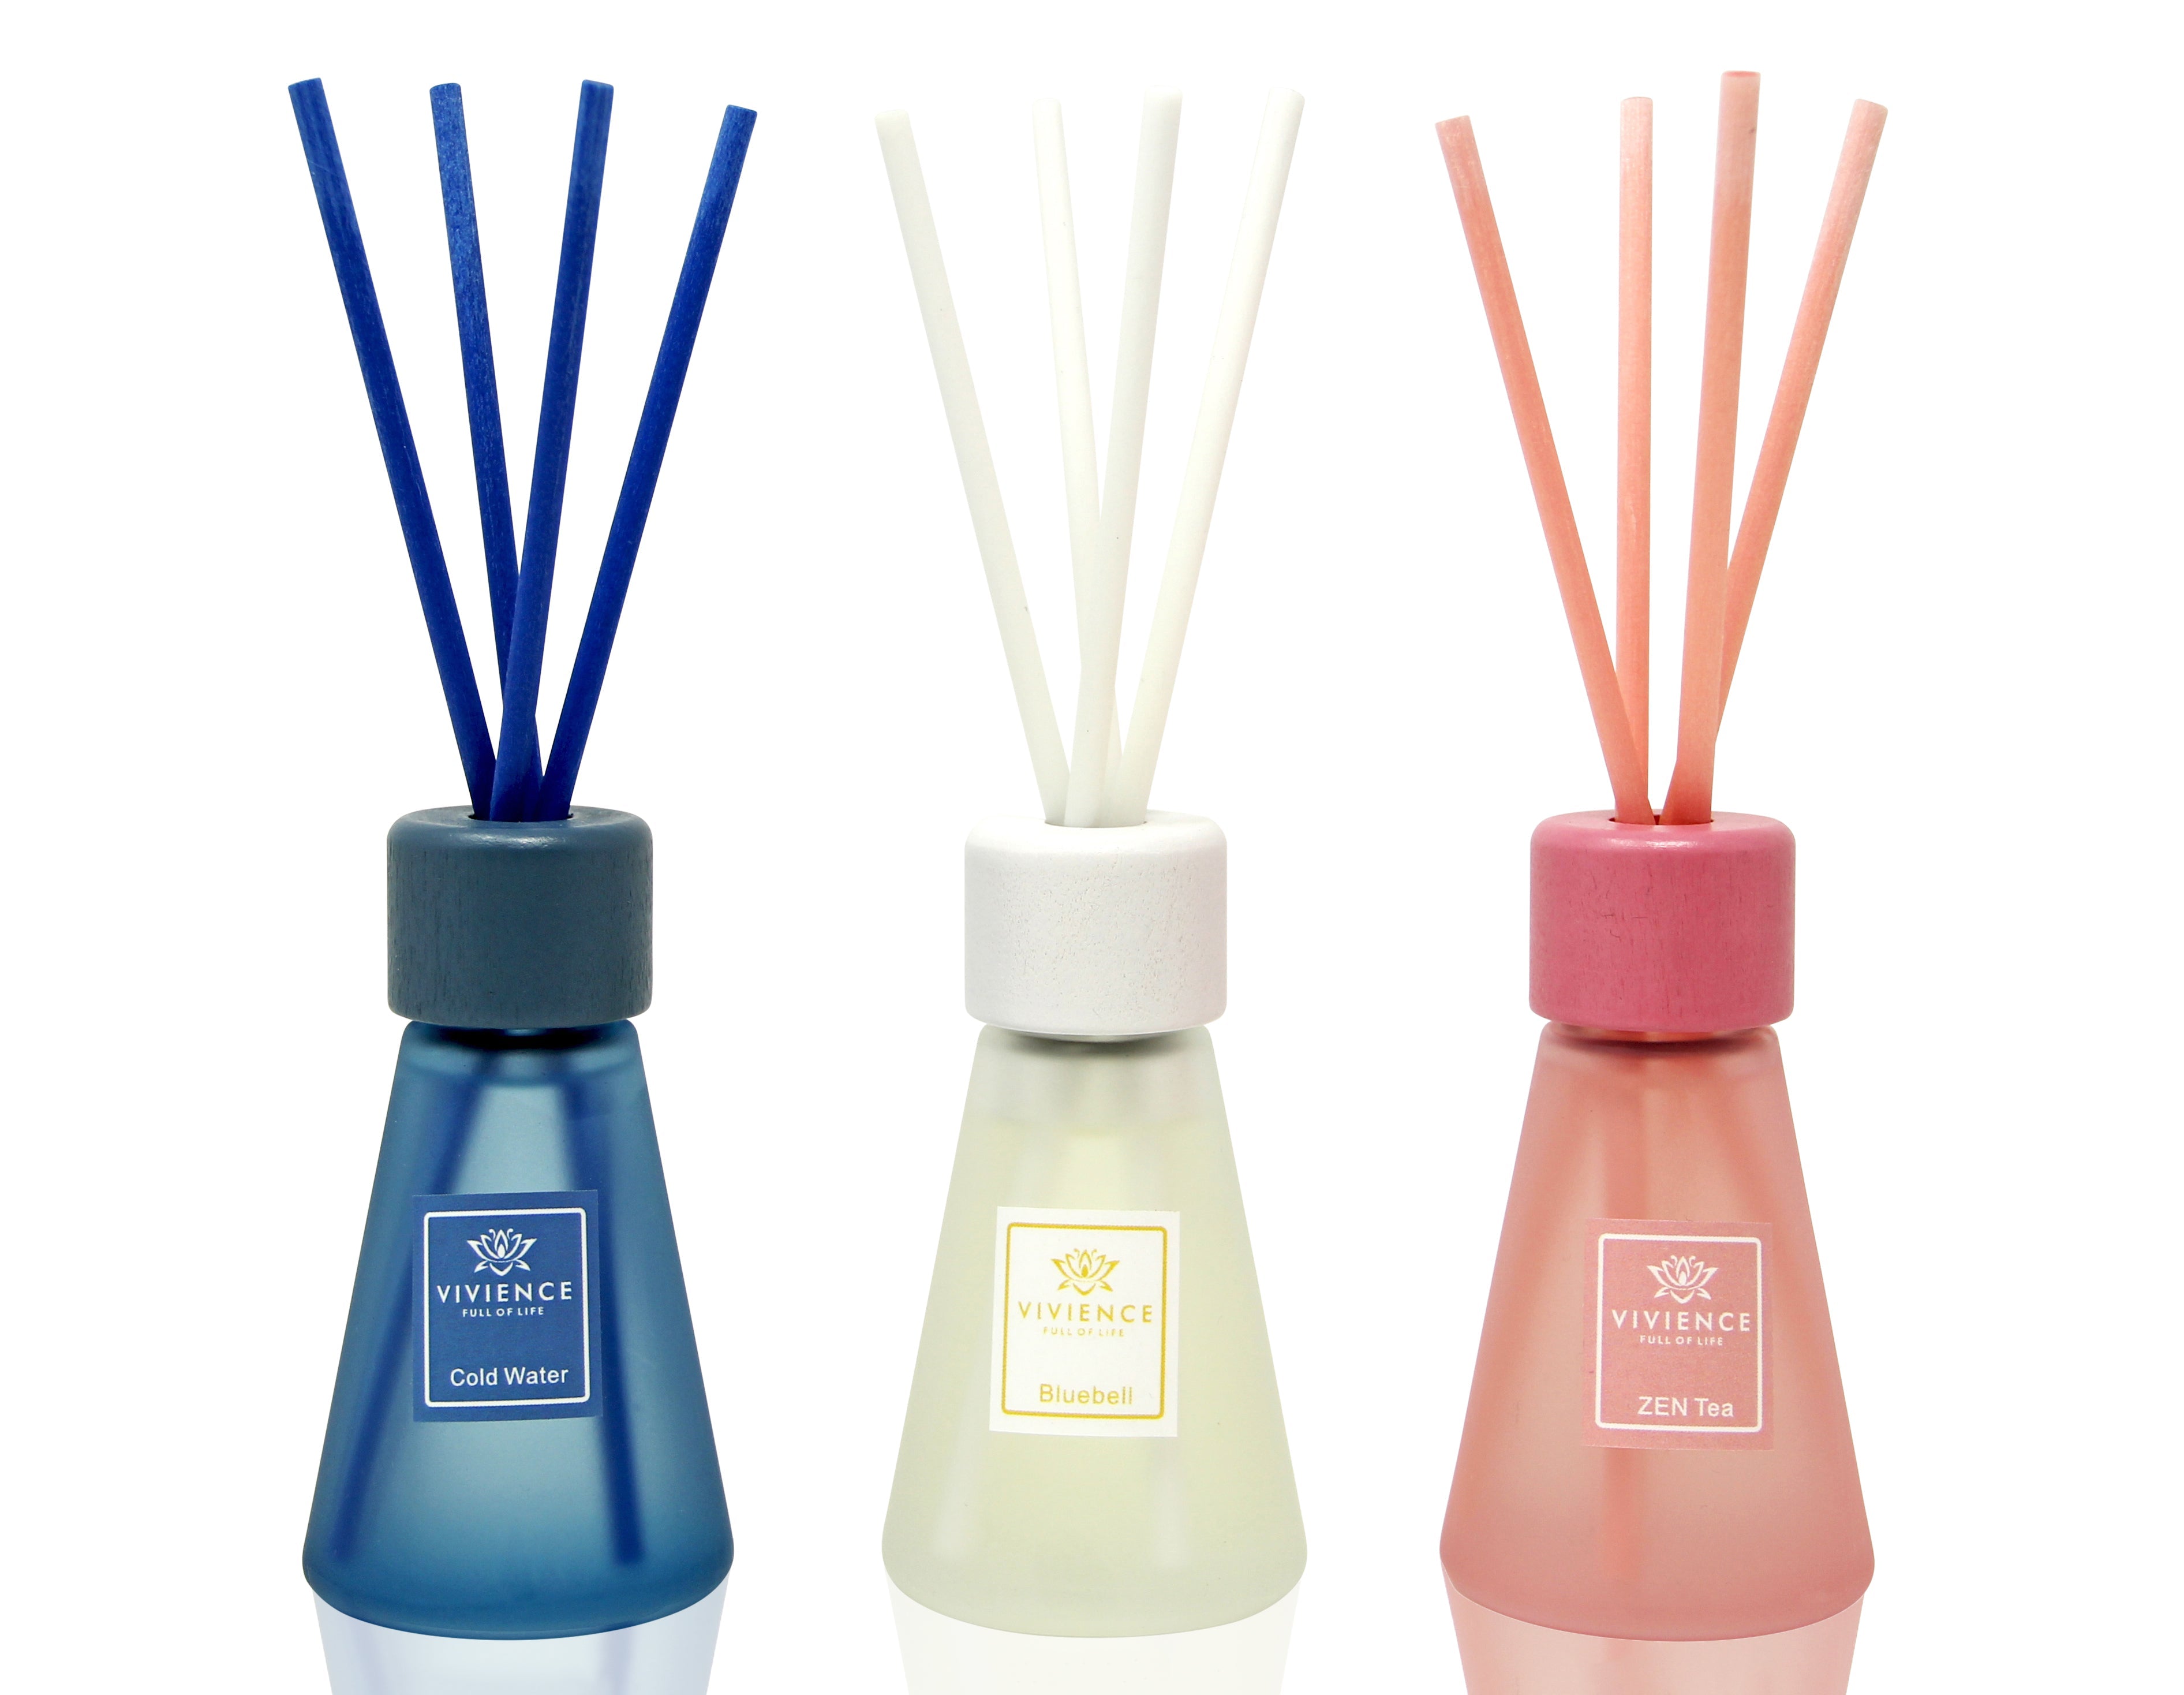 VIVIENCE Set of 3 Cone Shaped Reed Diffusers Assorted Colors